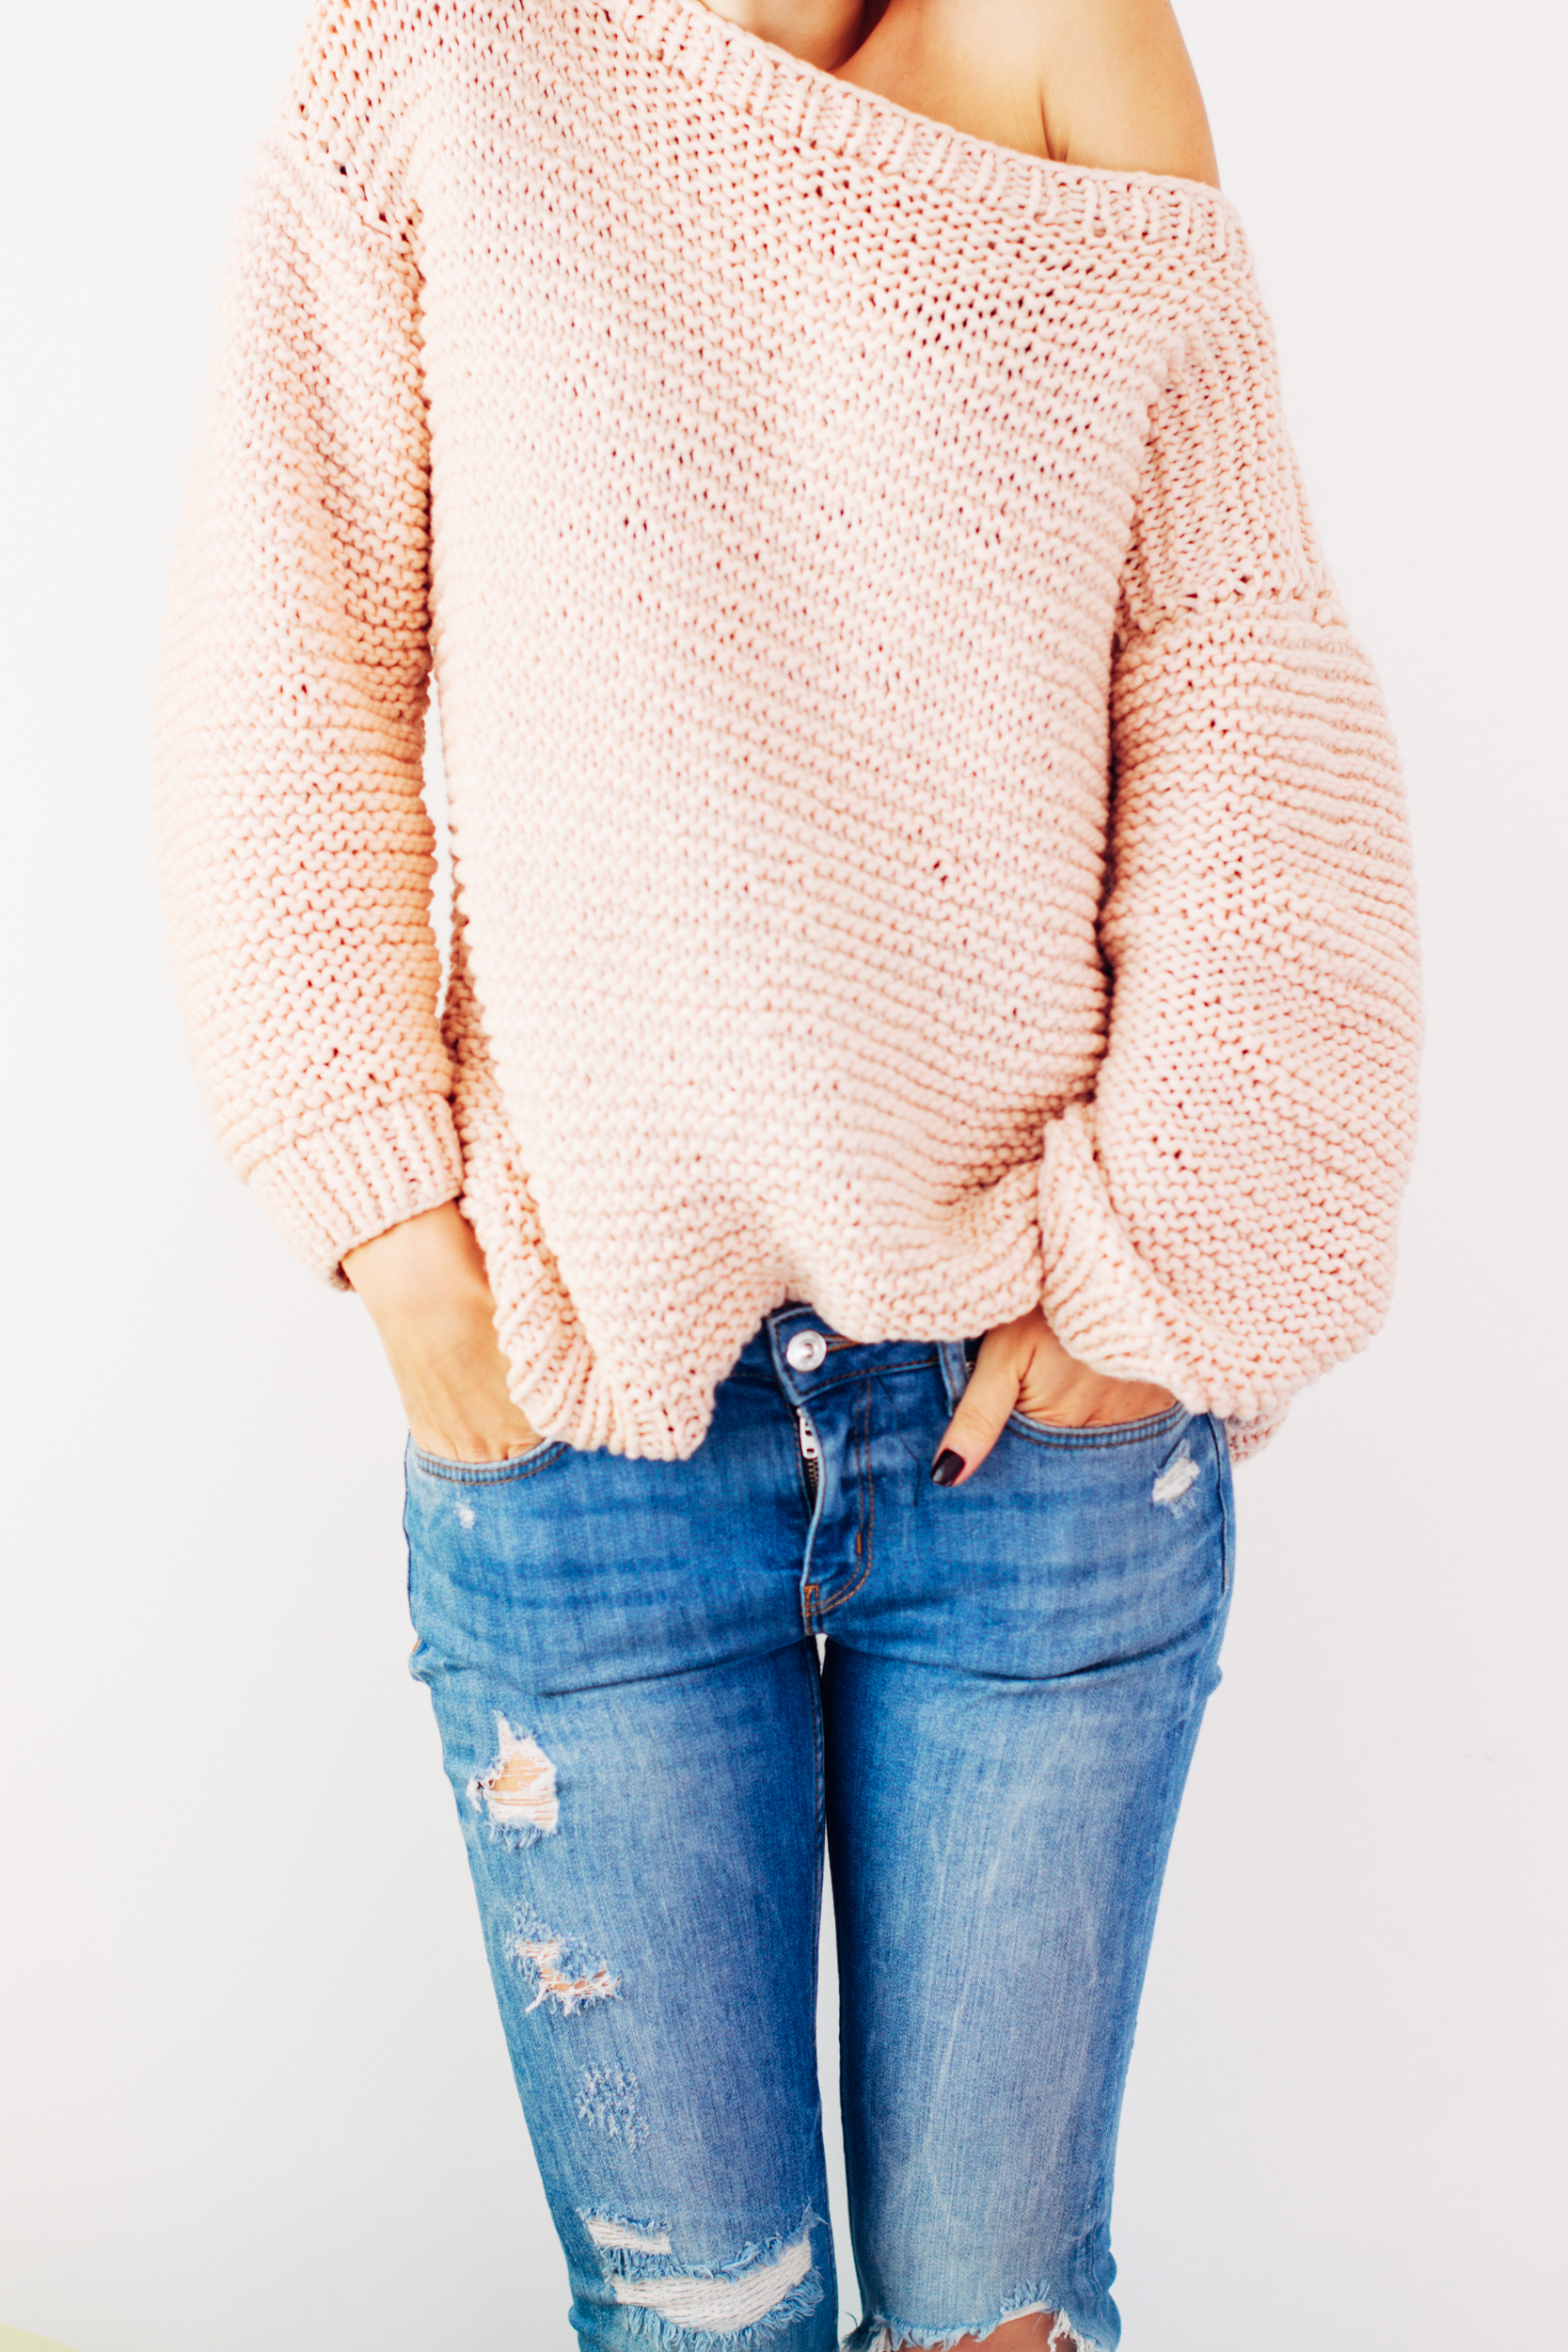 You Got This! Knit a Funky, Chunky, Oversized Sweater With